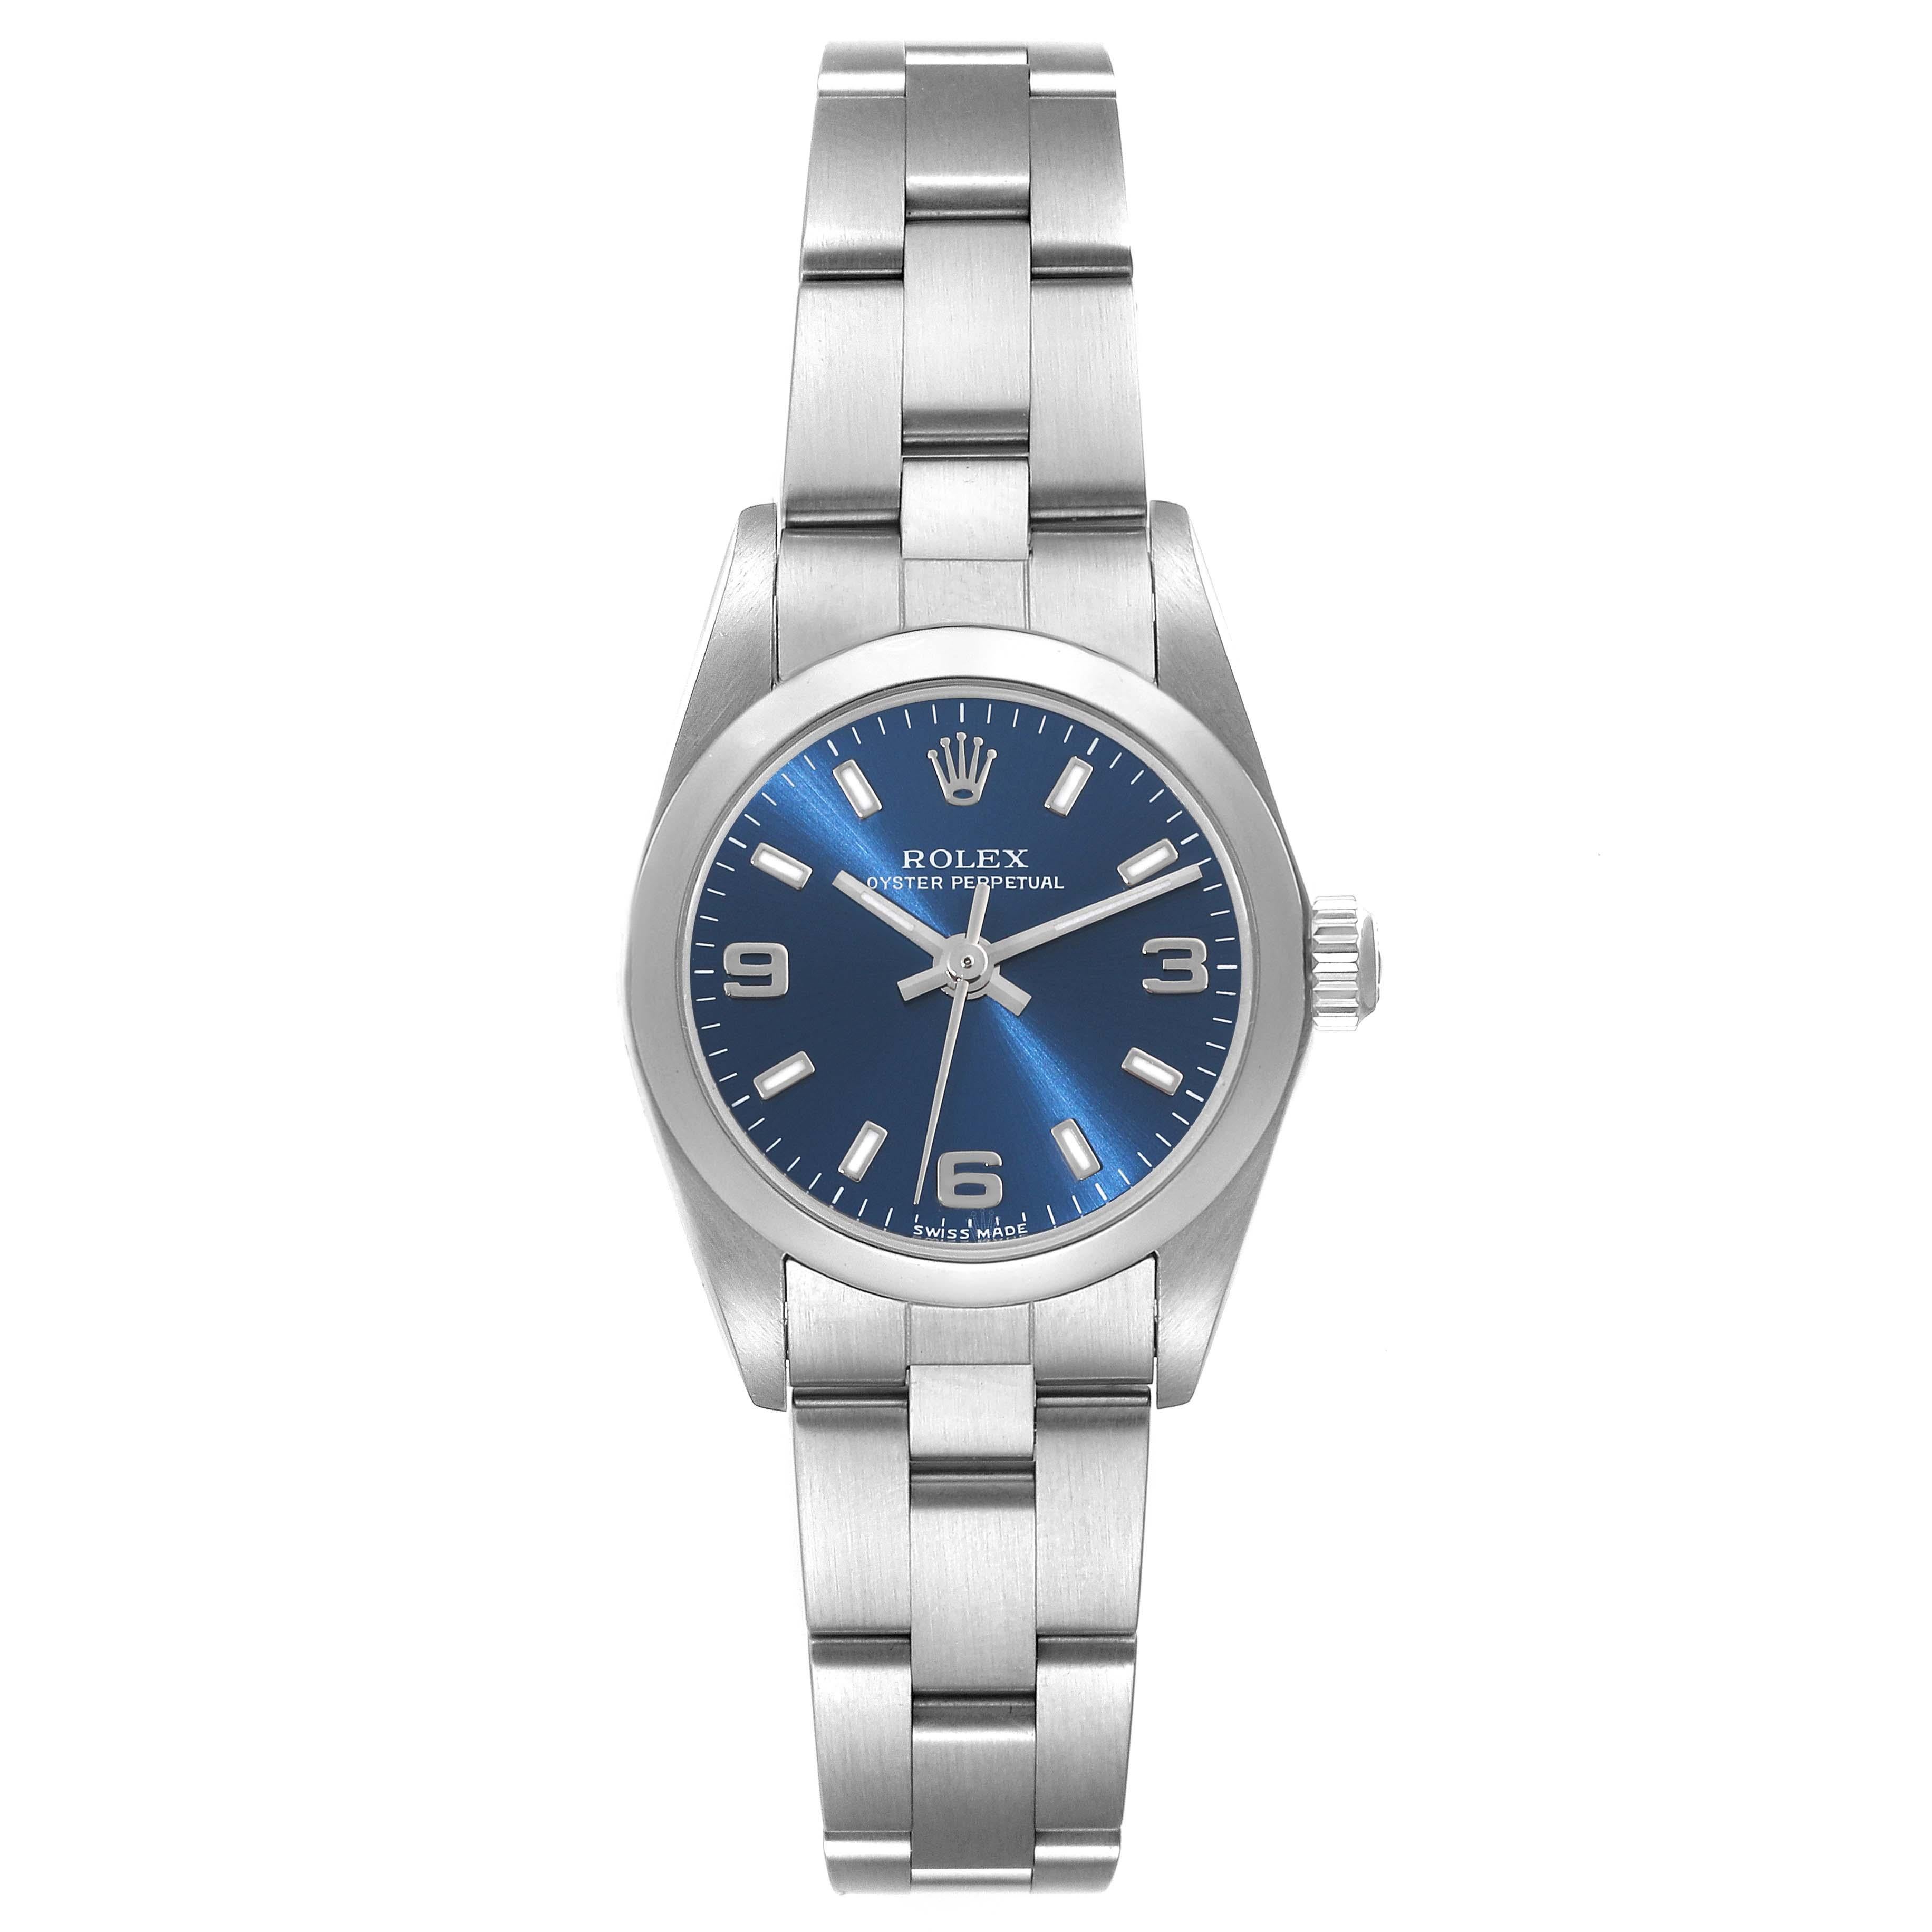 Rolex Oyster Perpetual Nondate Blue Dial Steel Ladies Watch 76080. Officially certified chronometer self-winding movement. Stainless steel oyster case 24.0 mm in diameter. Rolex logo on a crown. Stainless steel smooth domed bezel. Scratch resistant